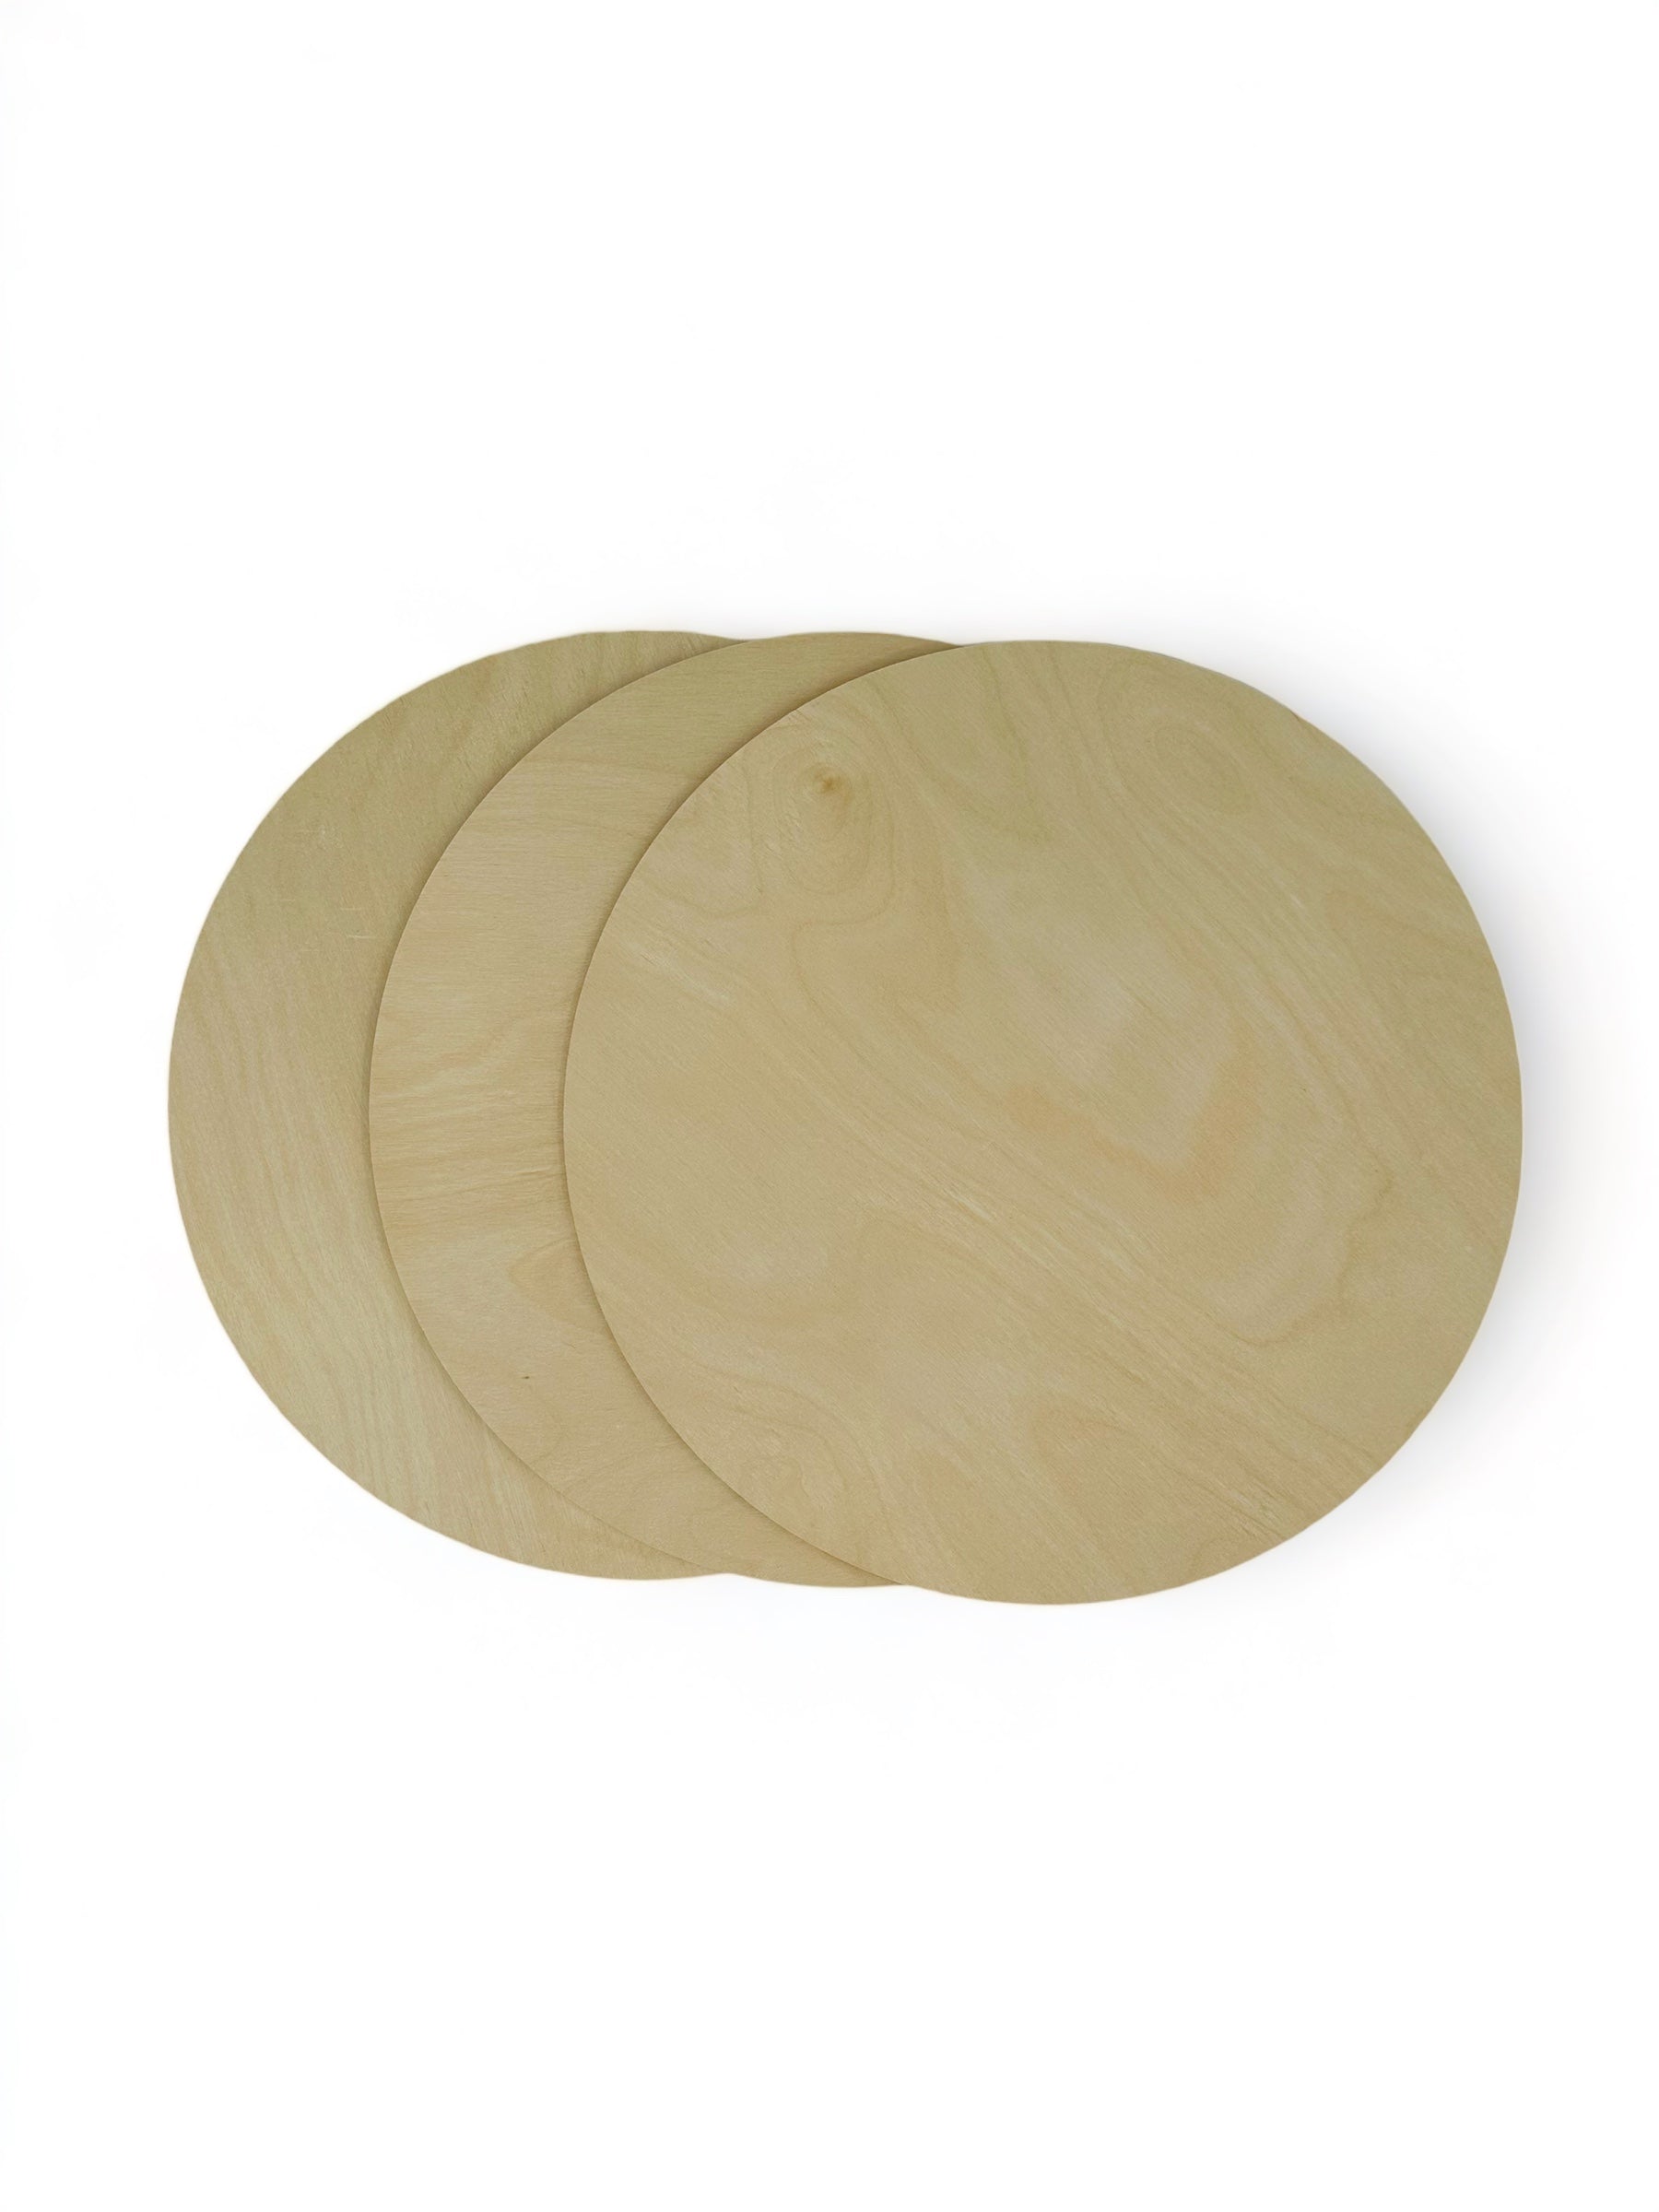 Birch Craft Elegance: 18-Inch Bundles of Birch Plywood Wooden Crafting Round Cutouts - 1/2-Inch Thick for art, decorating and DIY projects